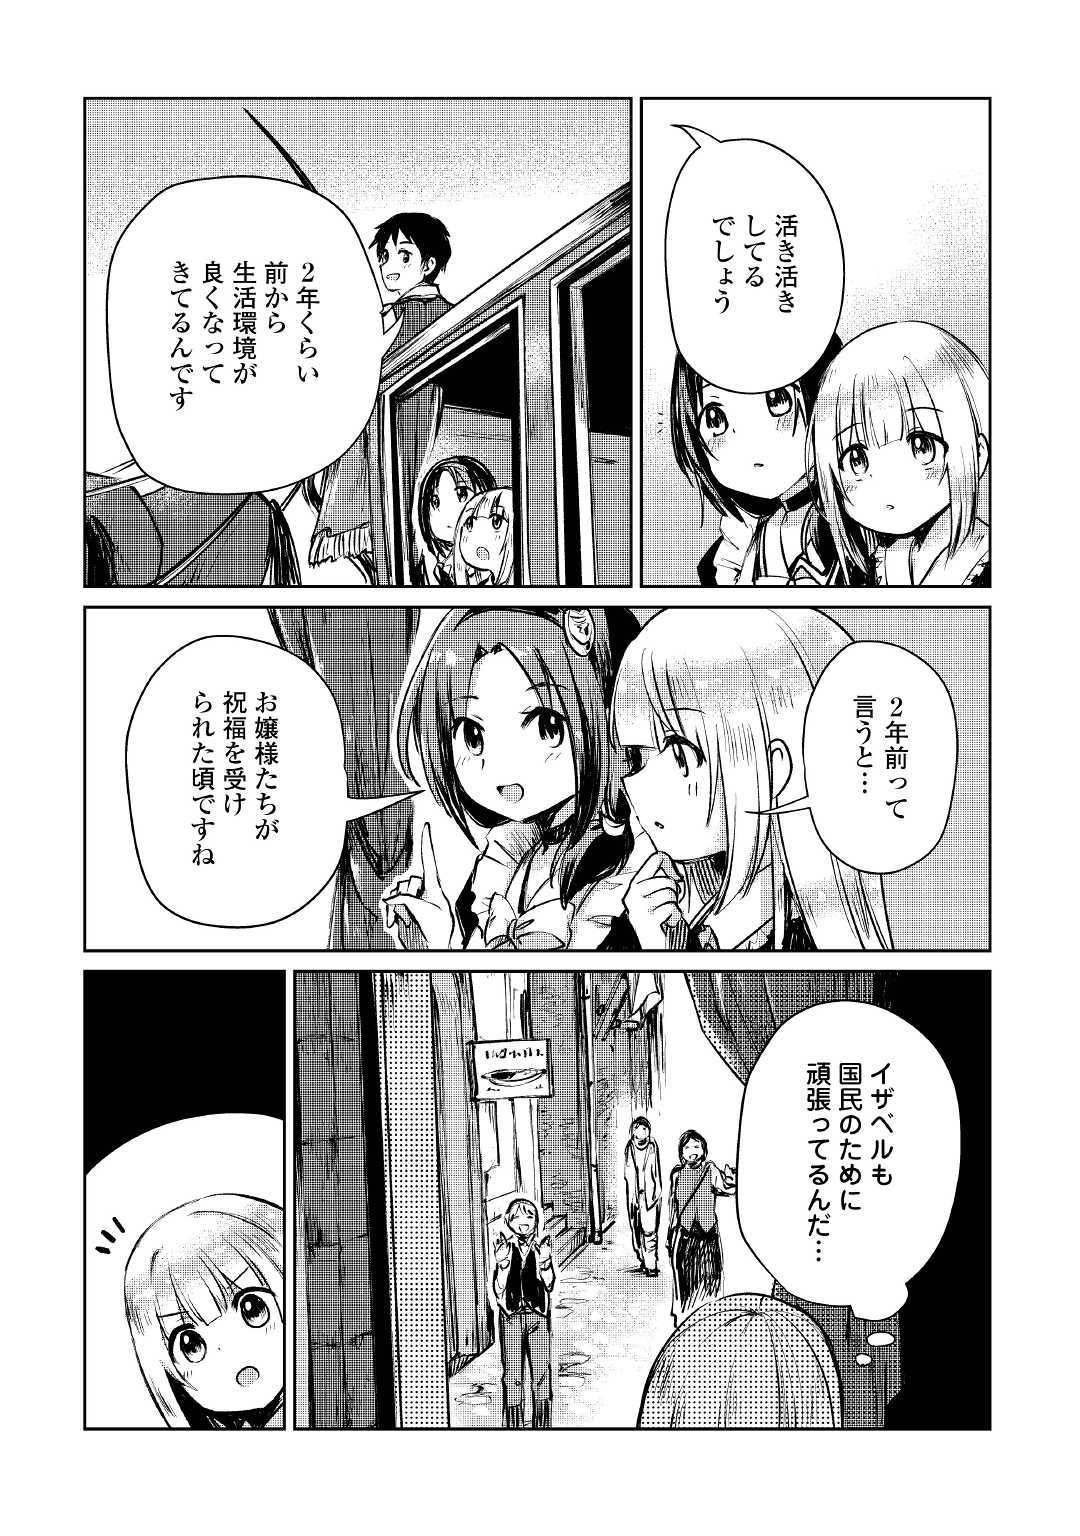 The Former Structural Researcher’s Story of Otherworldly Adventure 第8話 - Page 7